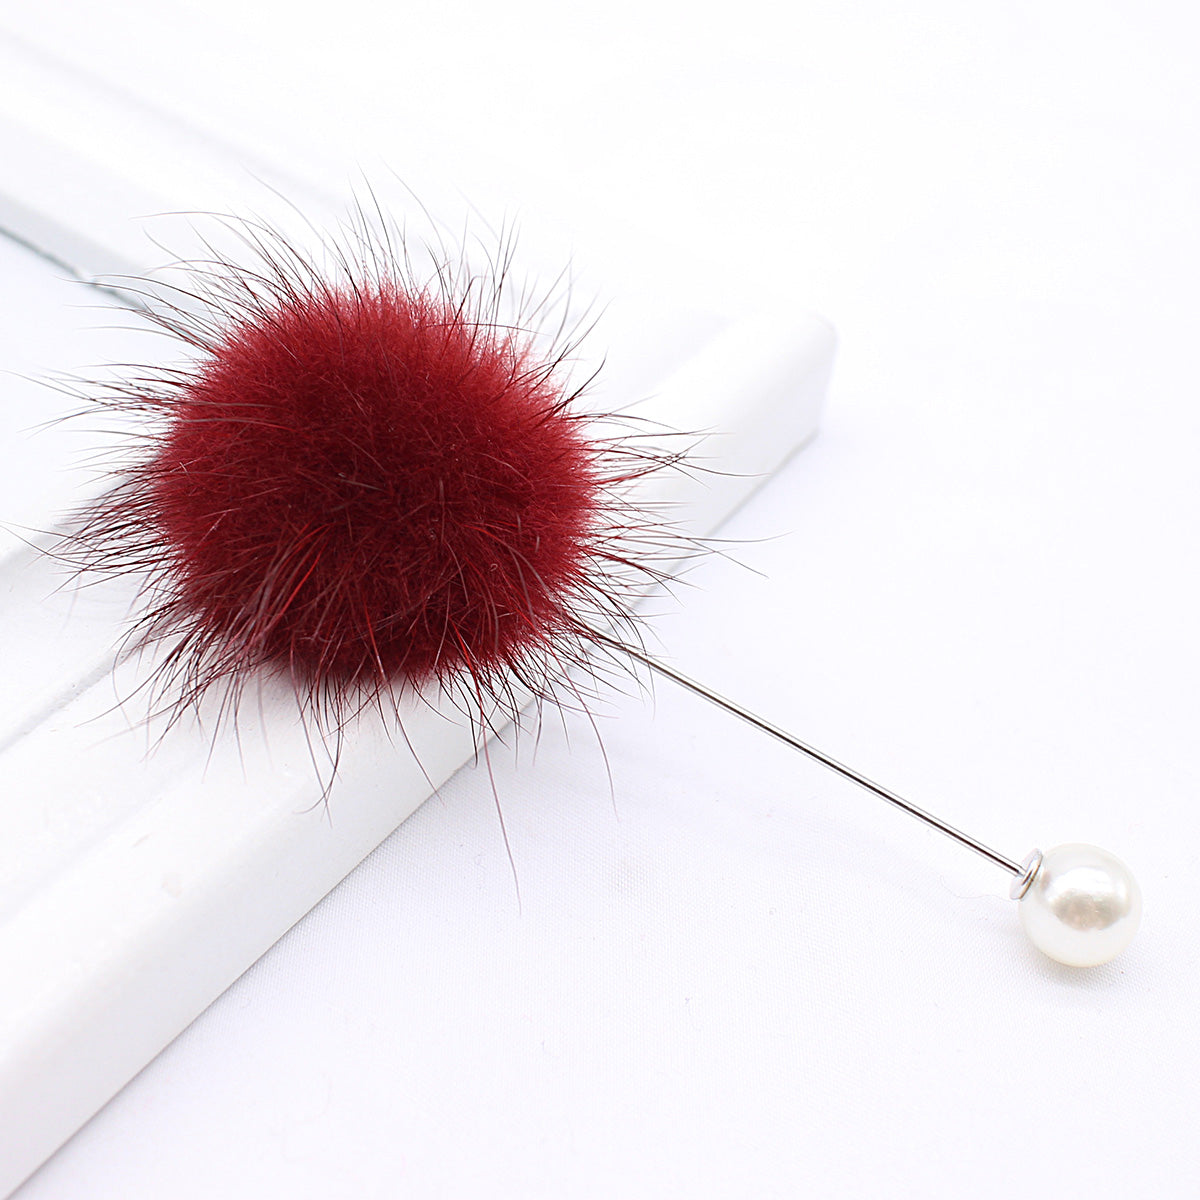 Fluffy Pearl Pin Brooches